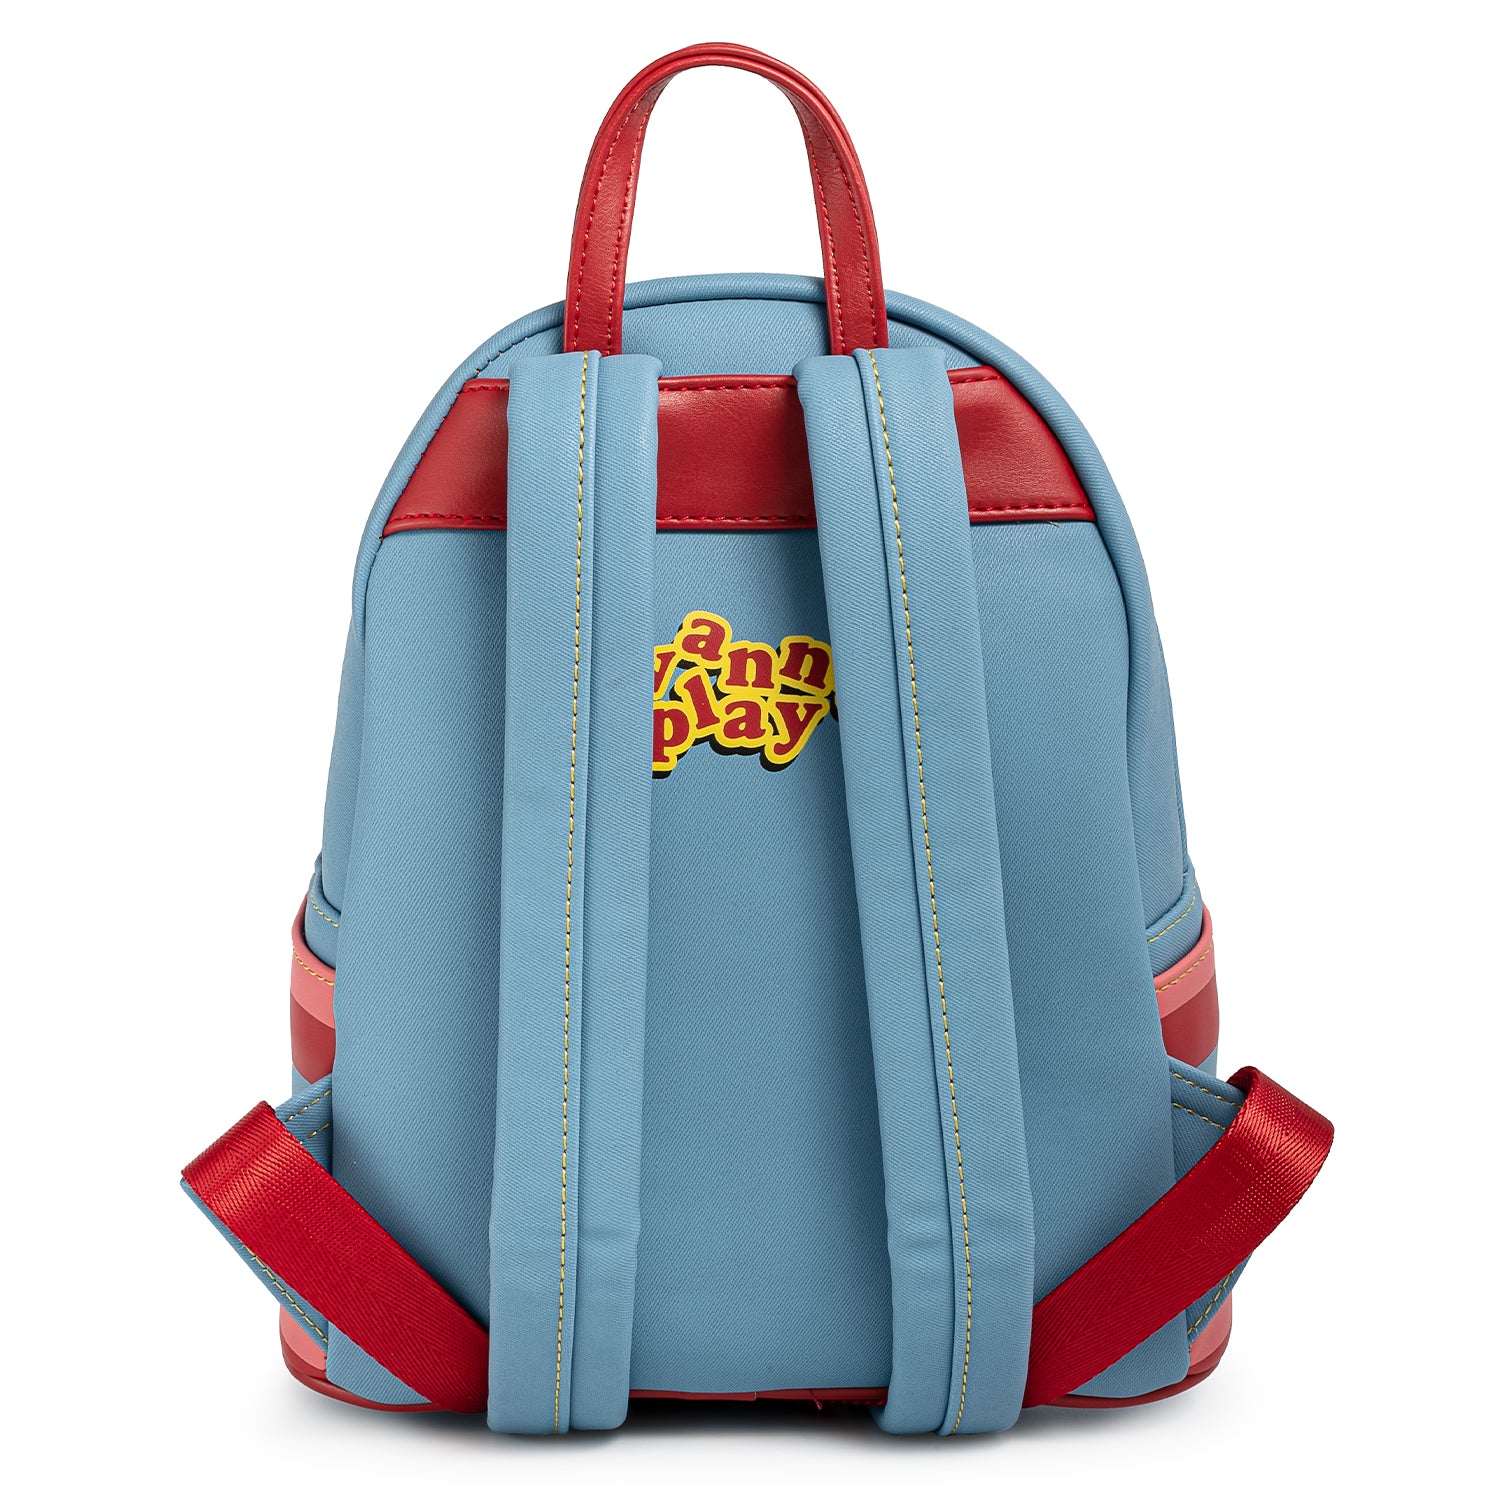 Loungefly Childs Play Chucky Cosplay Mini Backpack